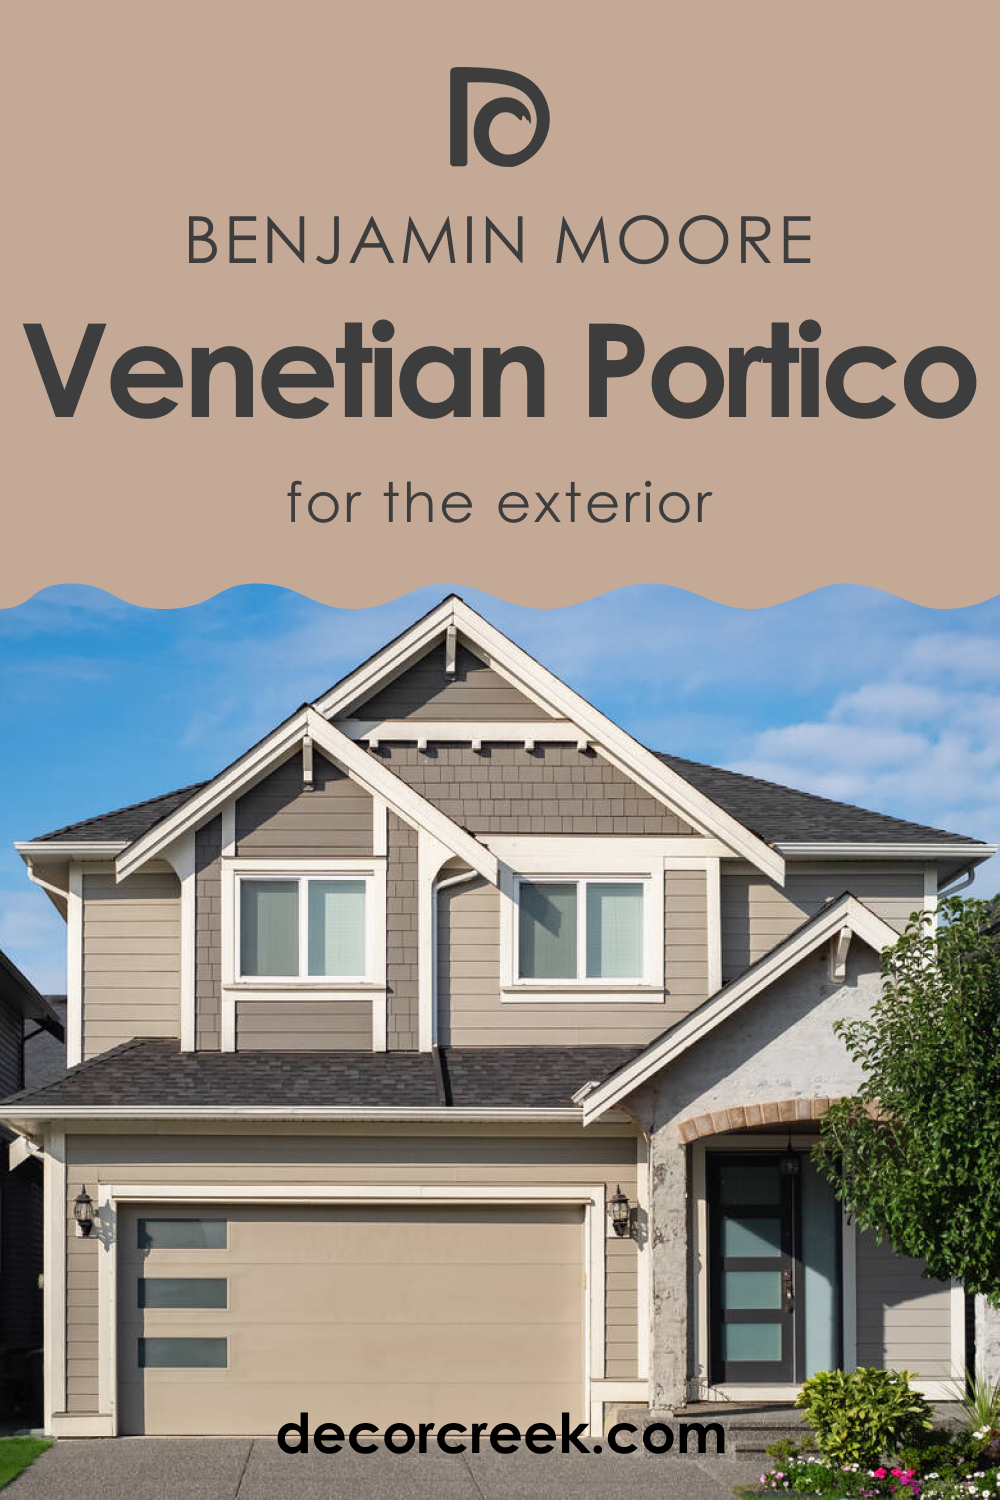 How to Use Venetian Portico AF-185 for an Exterior?